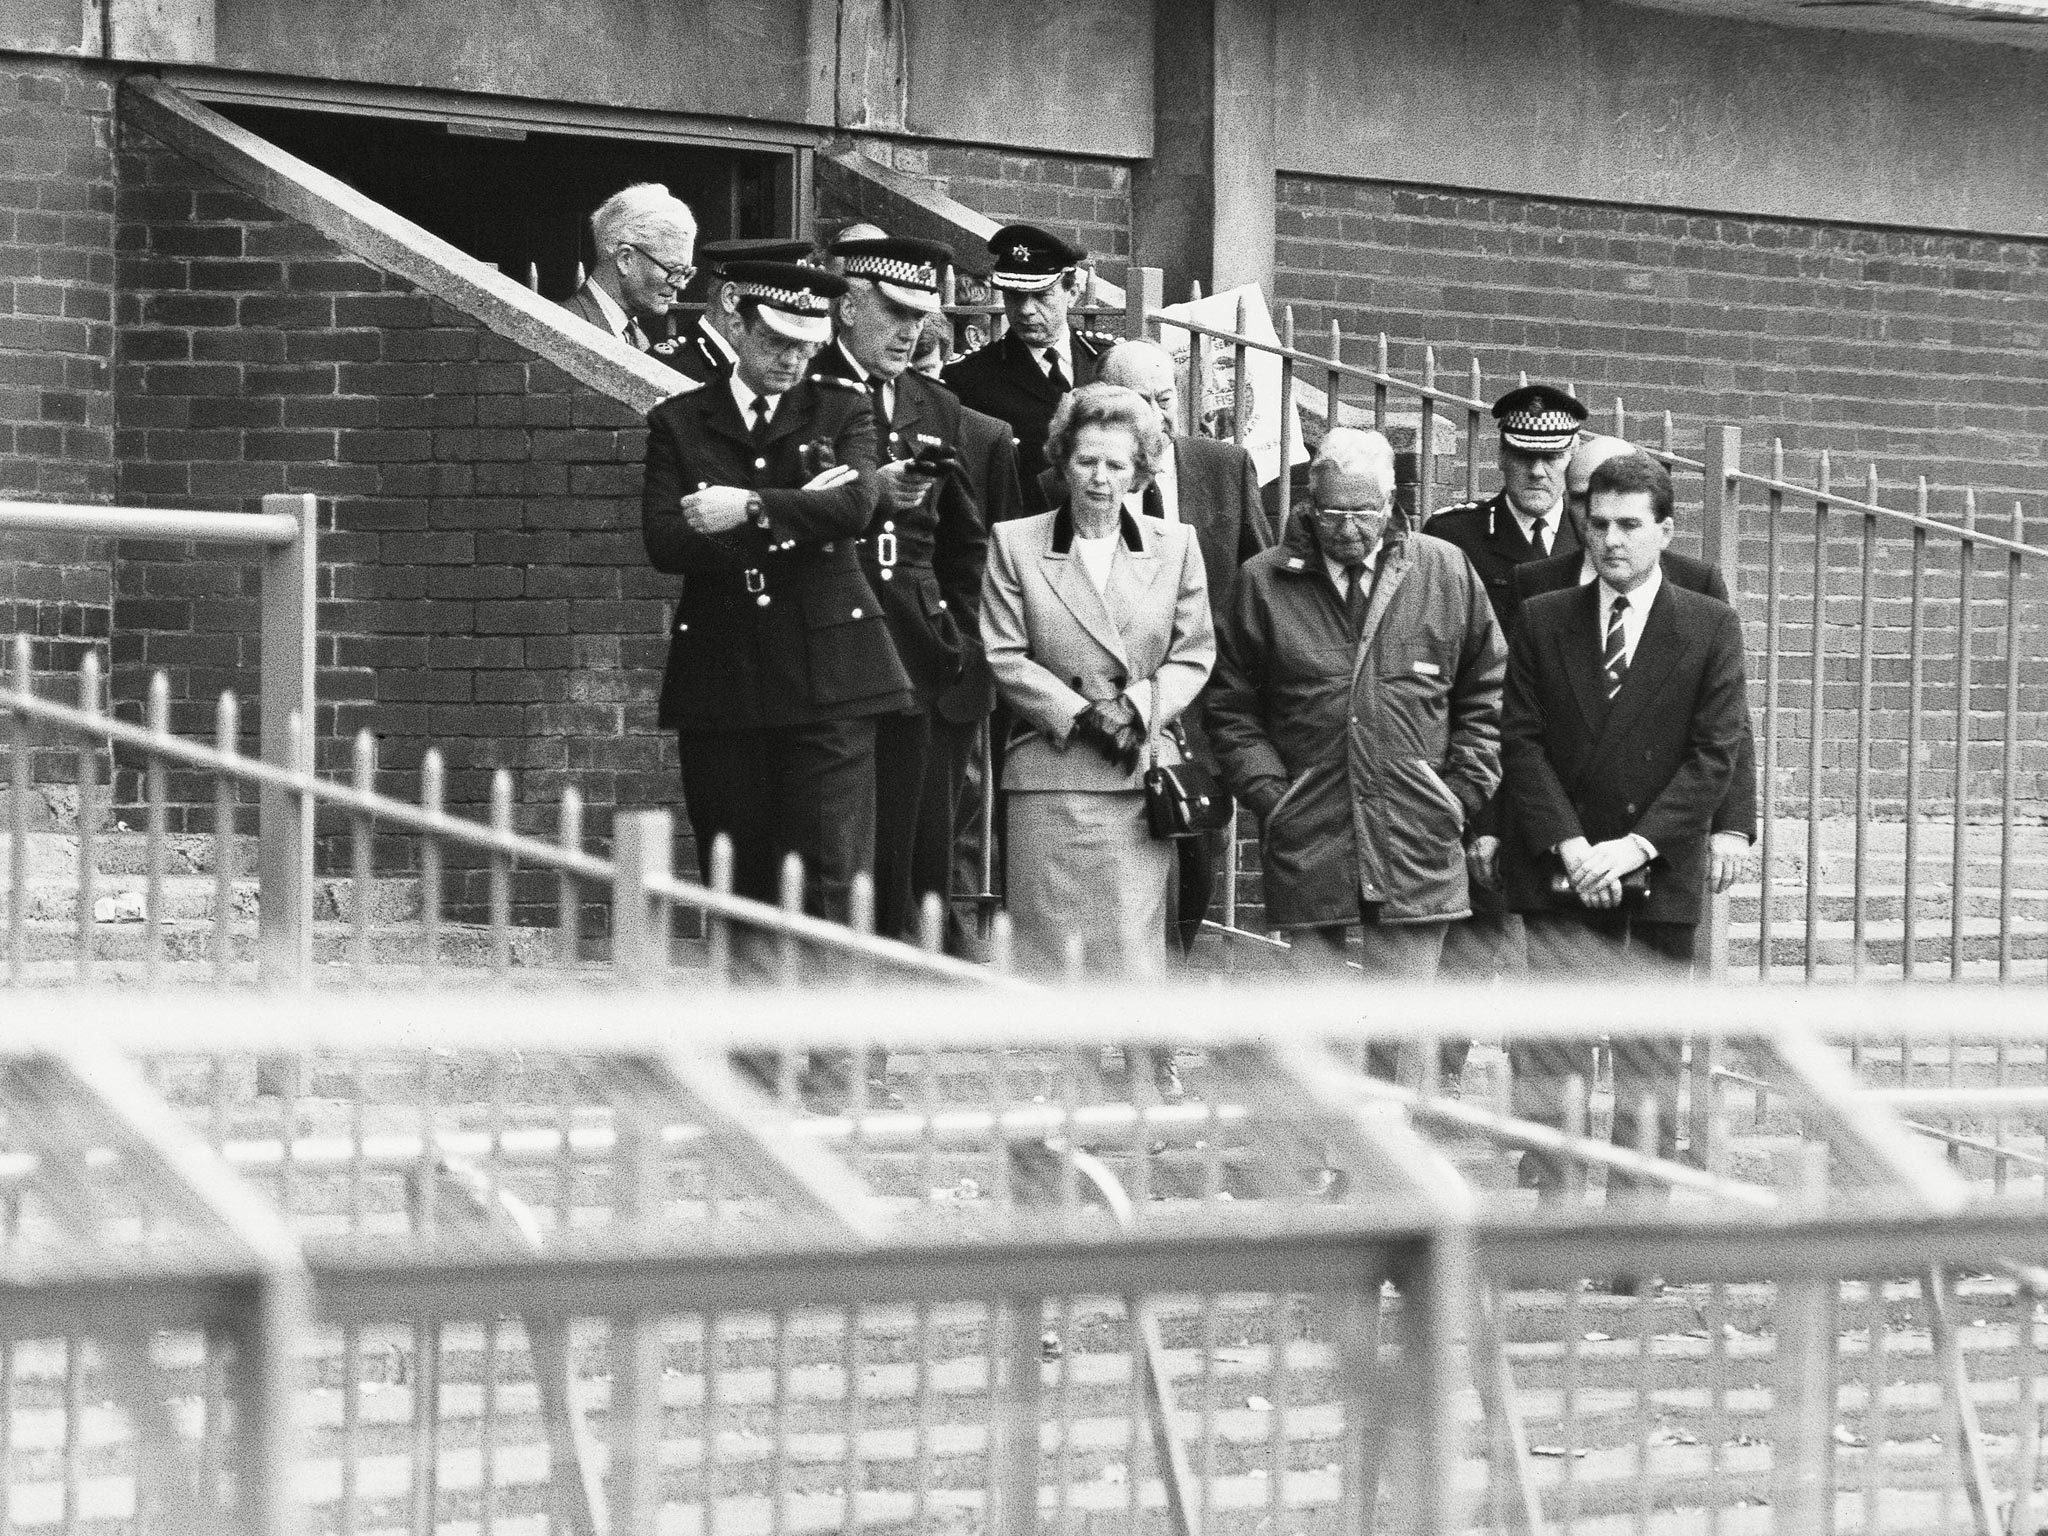 Tributes are paid by Margaret Thatcher in the wake of the Hillsborough disaster